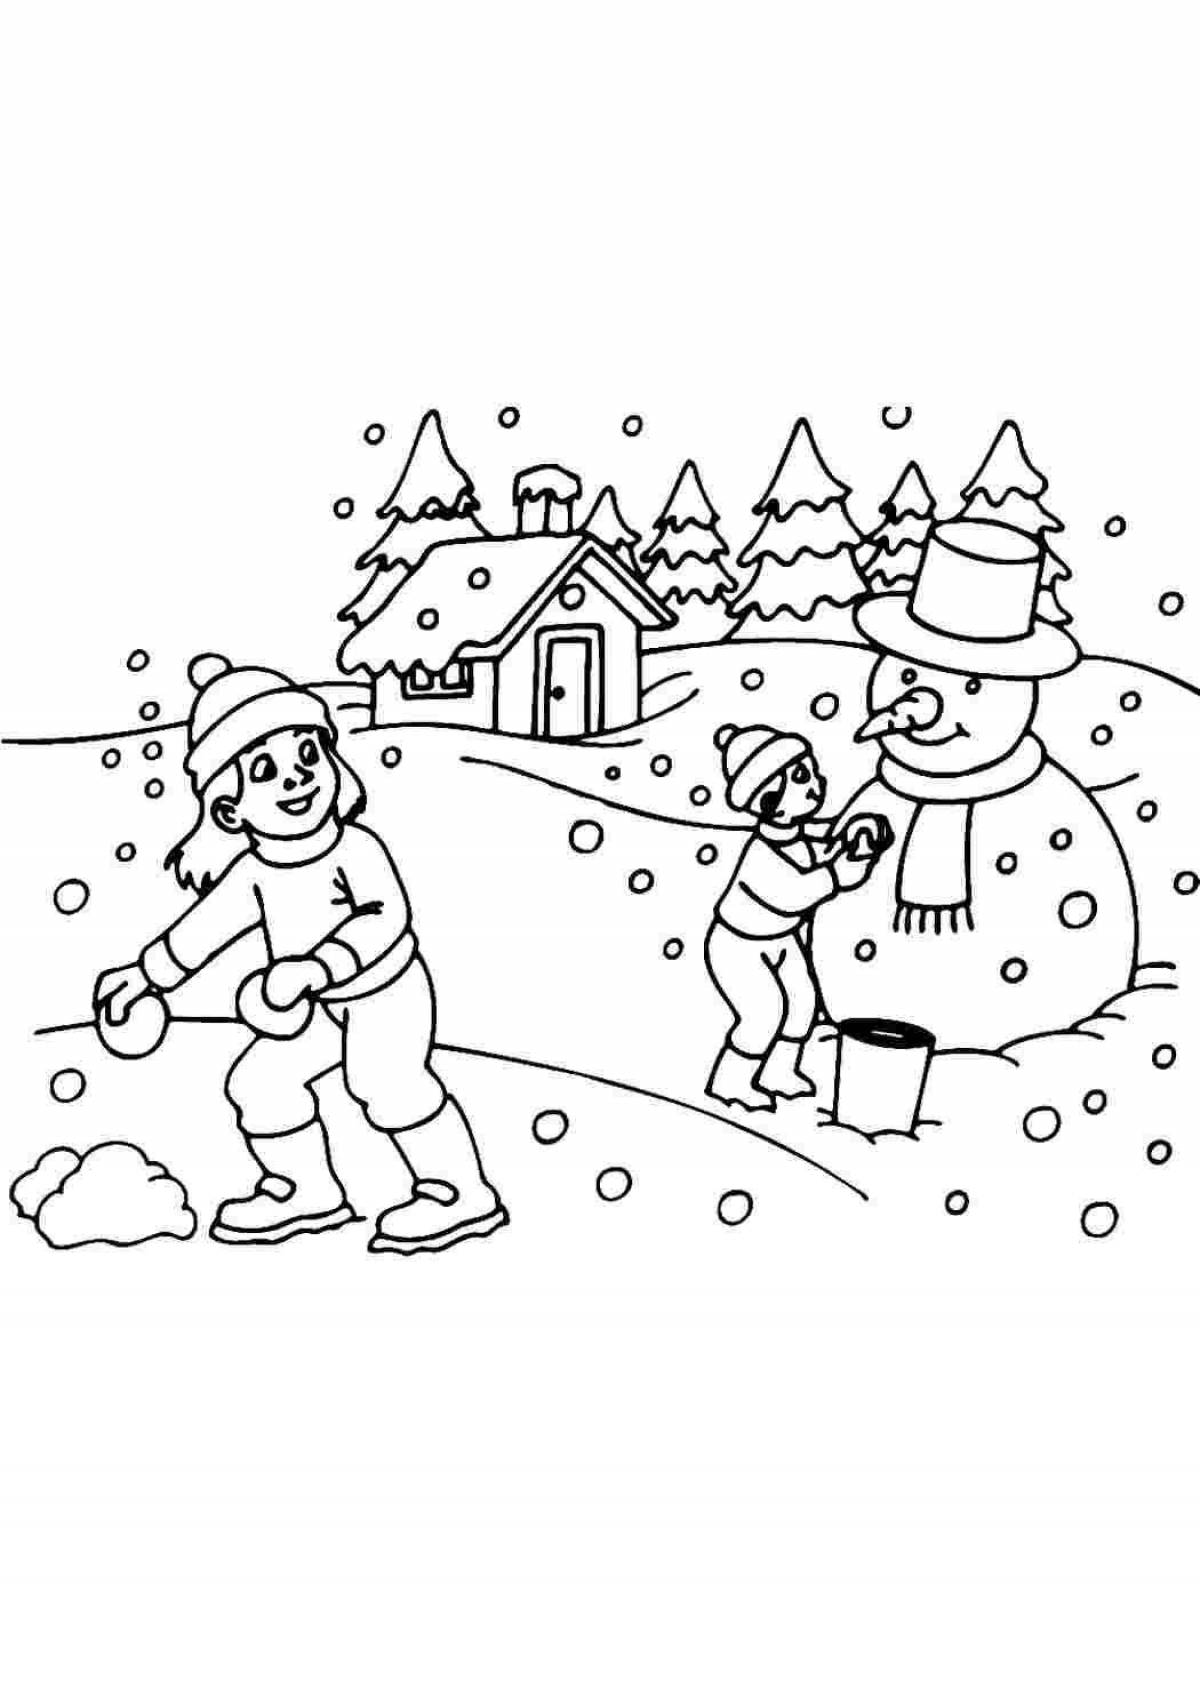 Brilliant winter landscape coloring book for children 6-7 years old